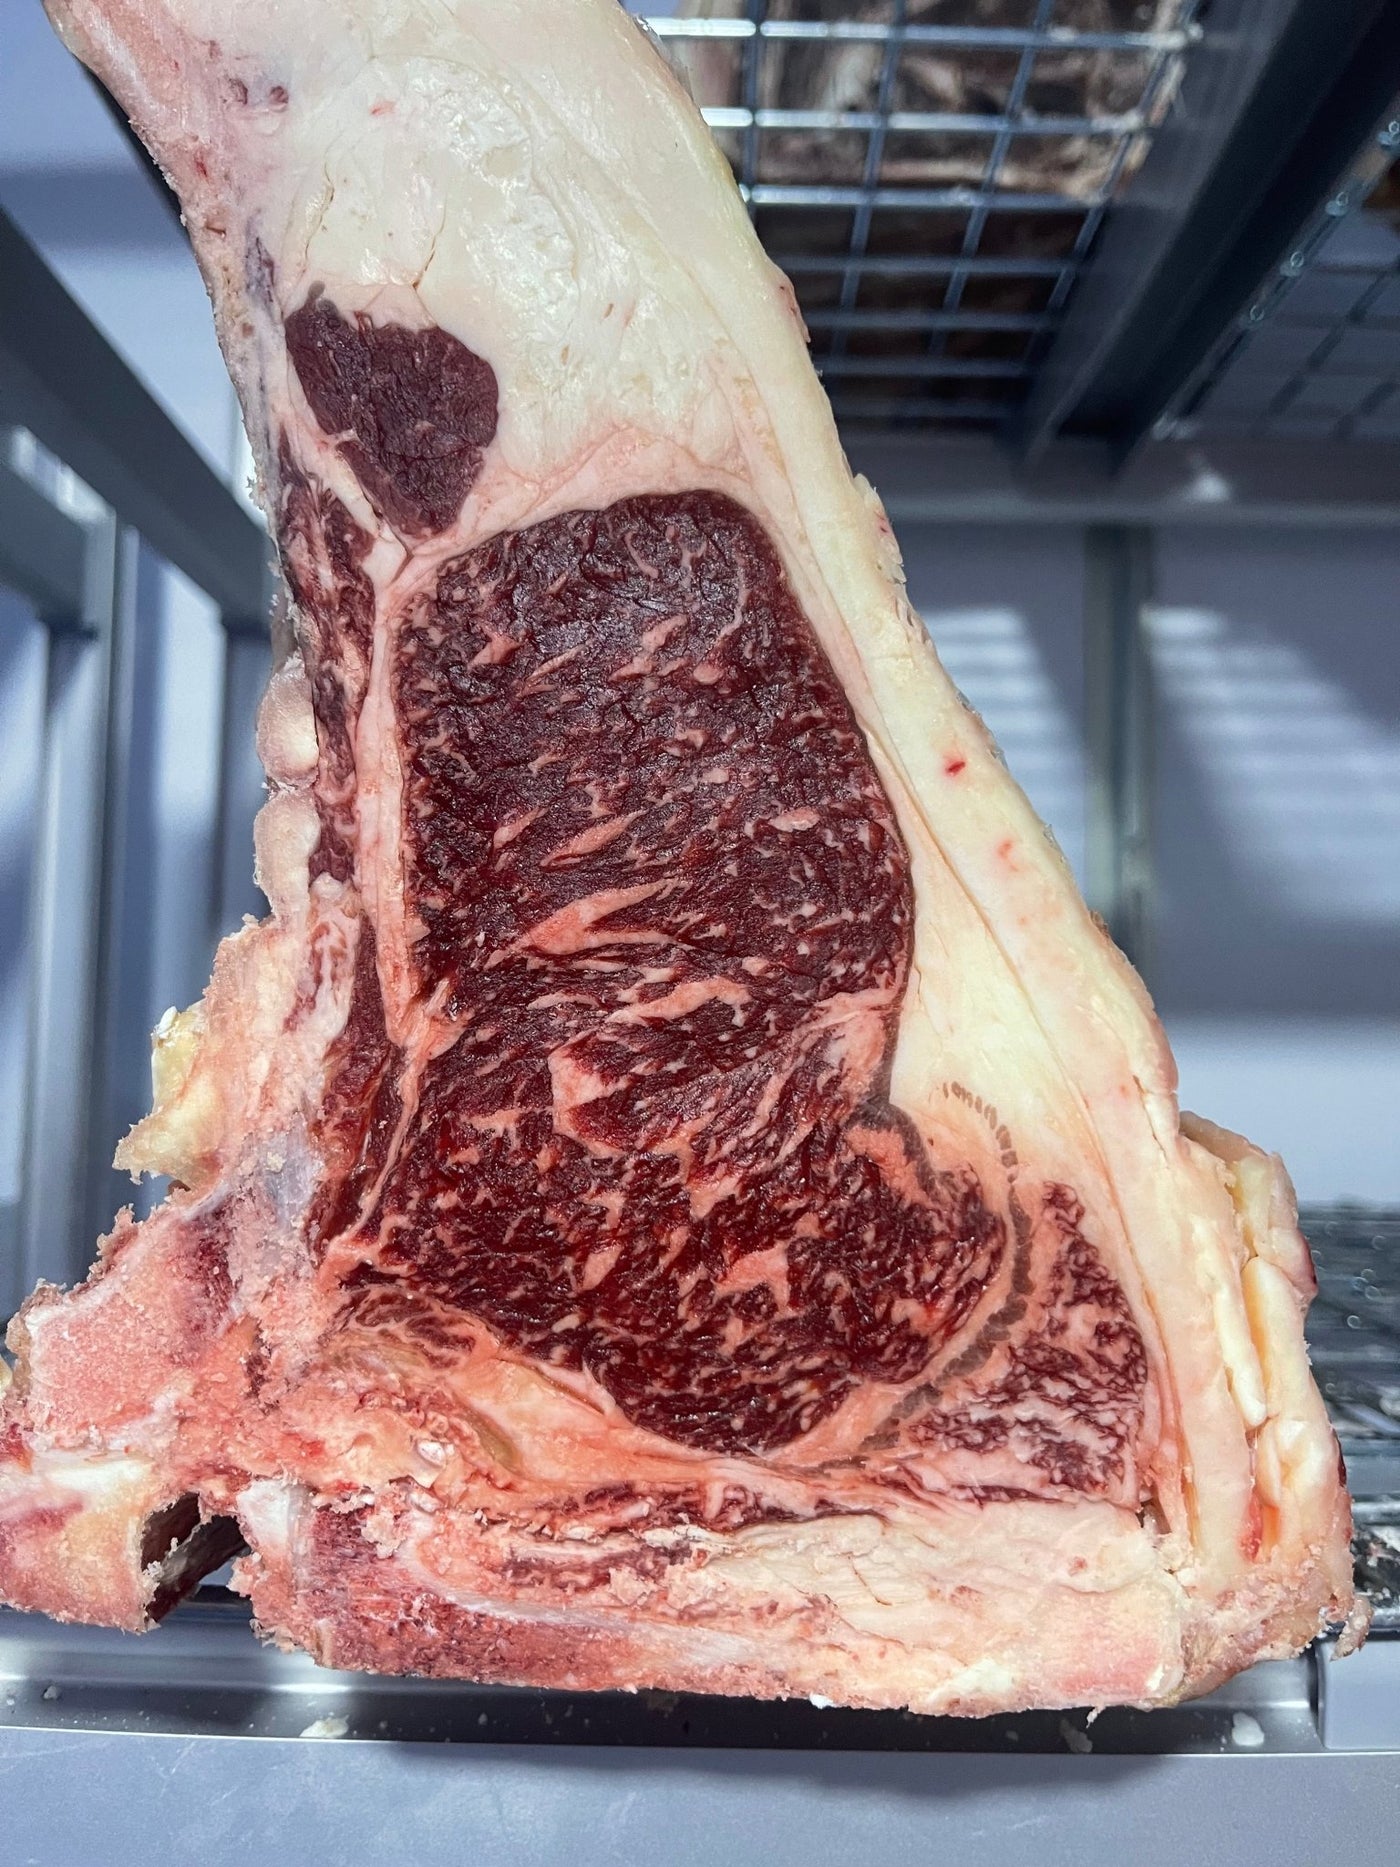 45 Day Dry-Aged German Ex Dairy Holstein Bone In Sirloin - Thomas Joseph Butchery - Ethical Dry-Aged Meat The Best Steak UK Thomas Joseph Butchery